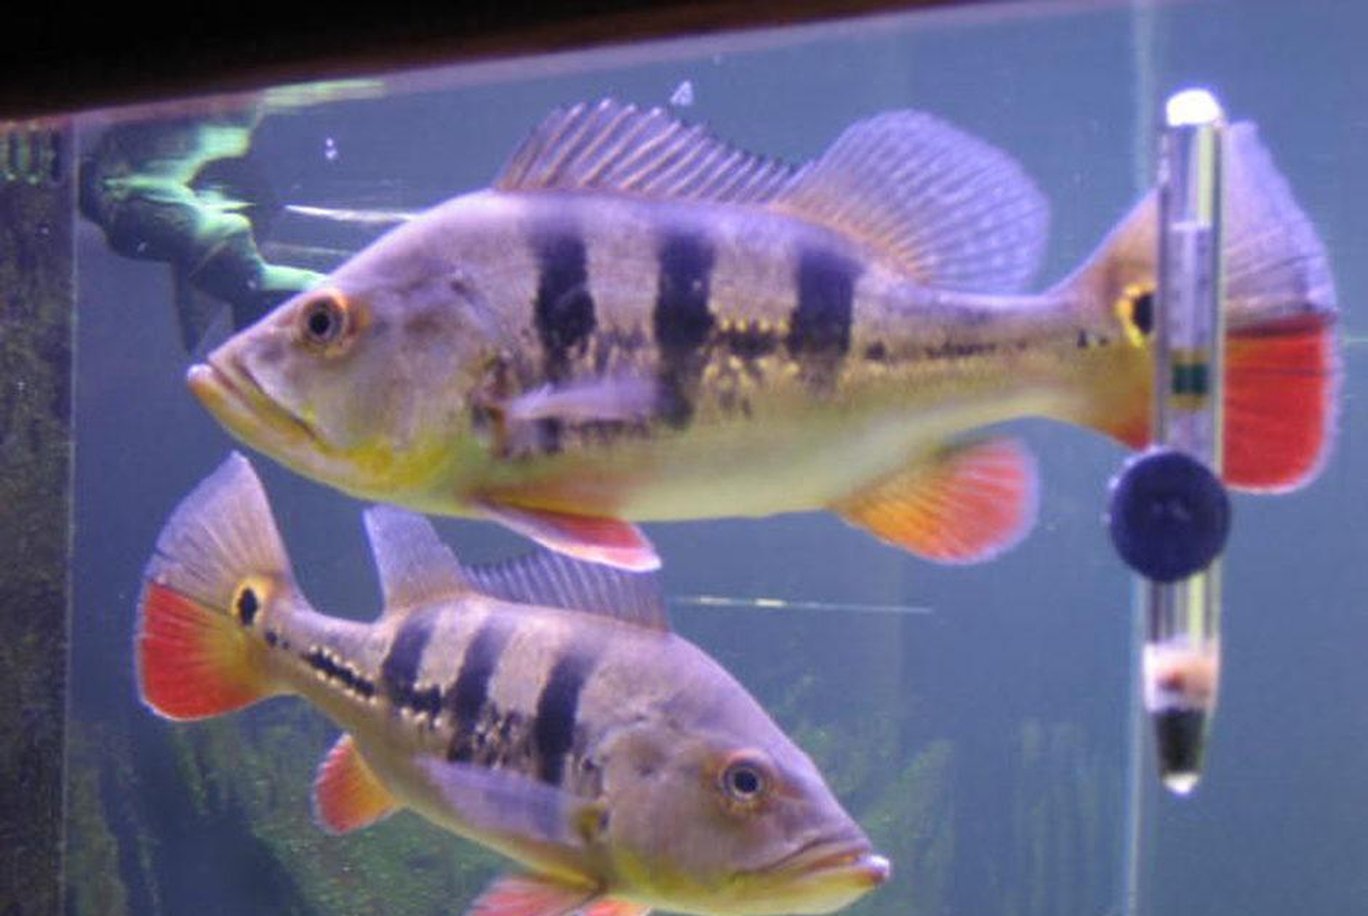 x1 Package - Peacock Bass Orinocoensis Cichlid Xlg only $334.55